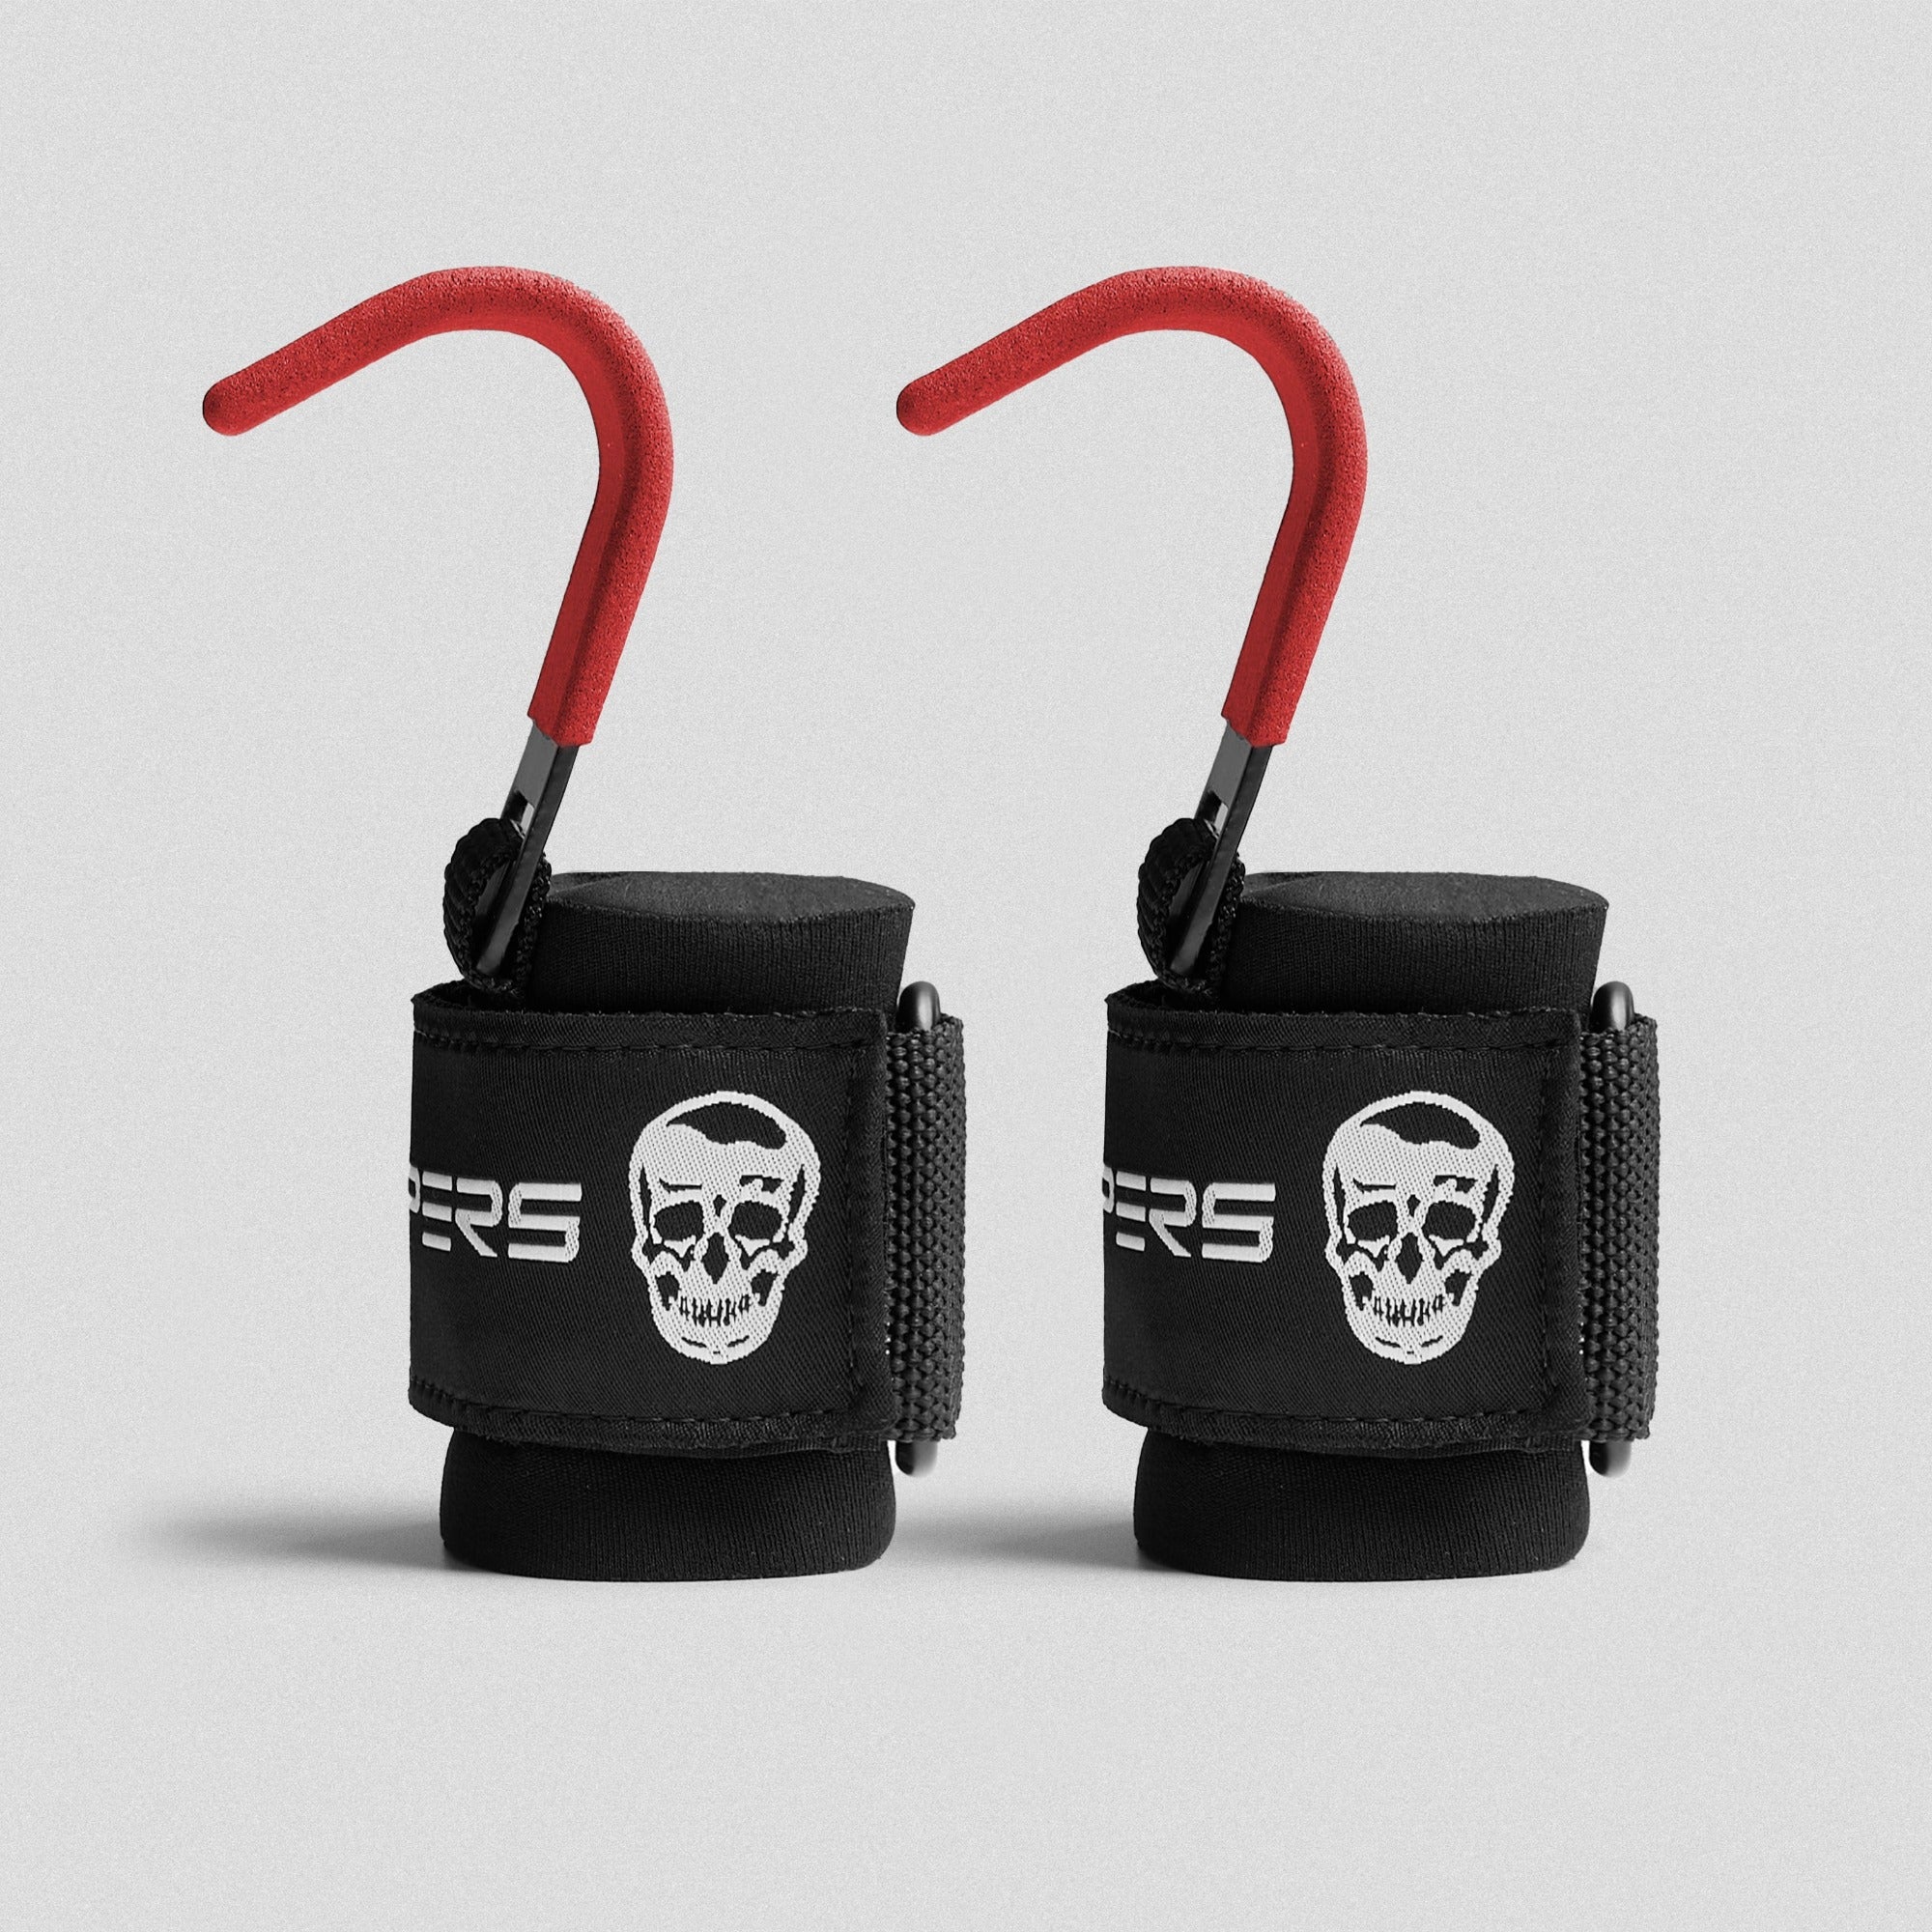 Gymreapers Lifting Hooks - Red  Weight lifting, Deadlift, Lifting